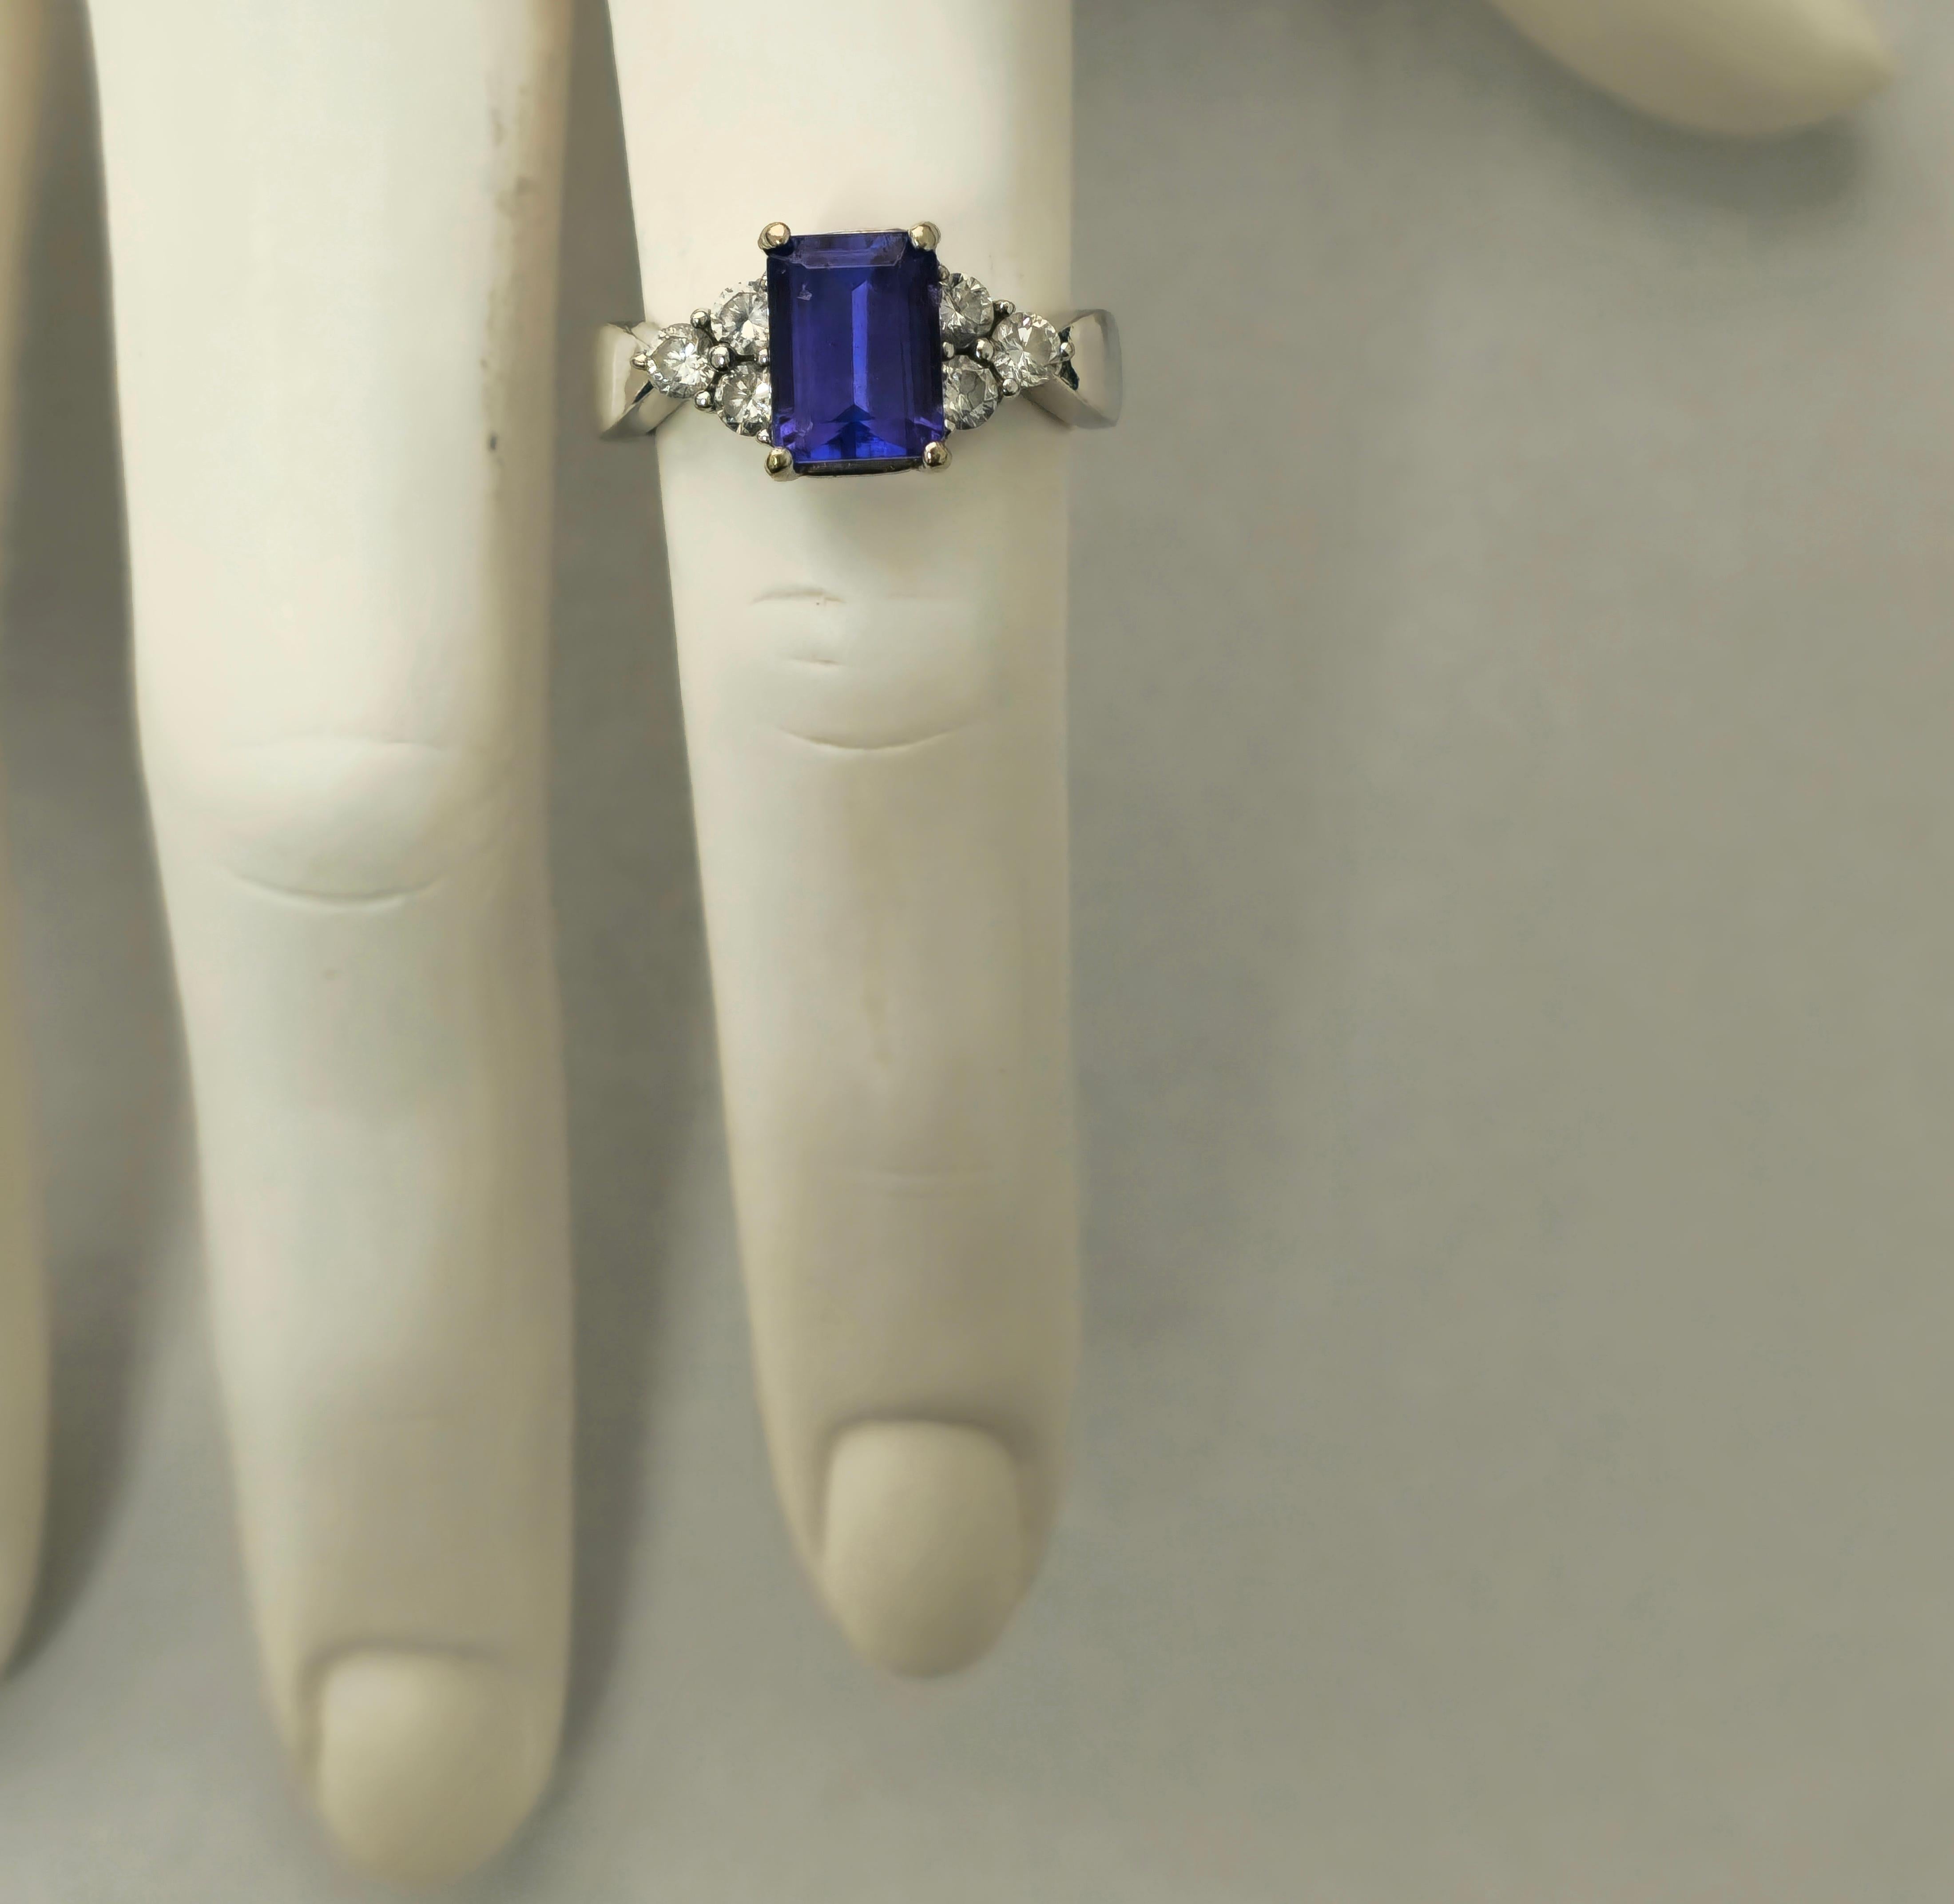 Fashioned from luxurious 14k white gold, this exquisite cocktail ring features a mesmerizing 2.20 carat tanzanite, cut in an elegant emerald shape, sourced directly from the earth's treasures. Accentuating its allure are brilliant diamonds totaling